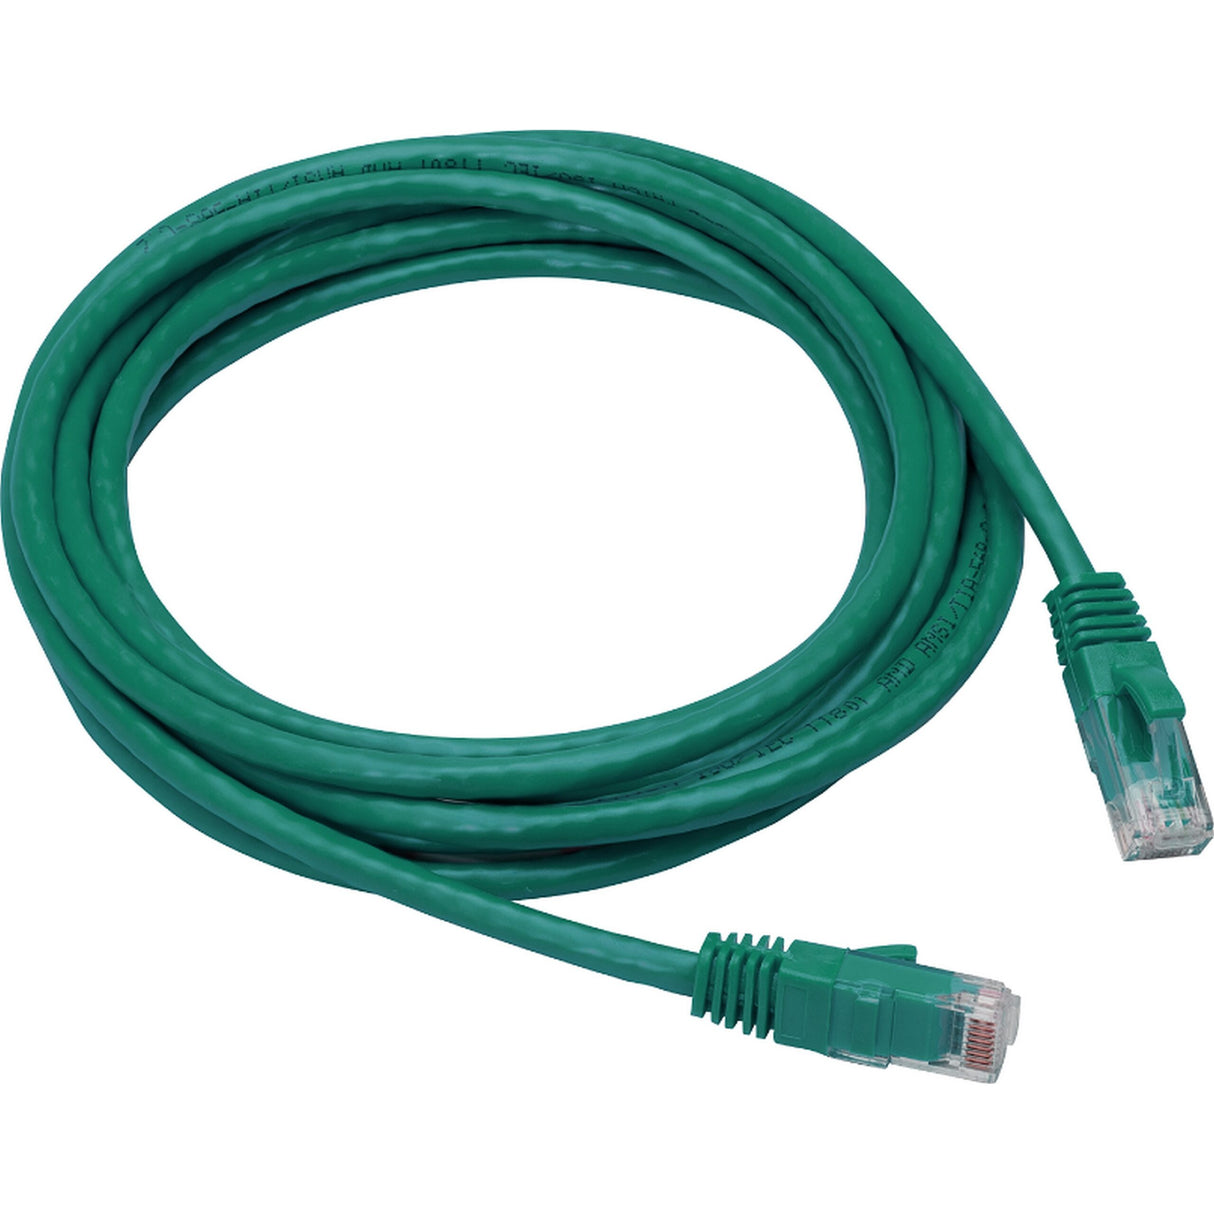 Liberty AV 152G5U5025 Category 5E True 24AWG Patch Cable, 25 Foot, Green